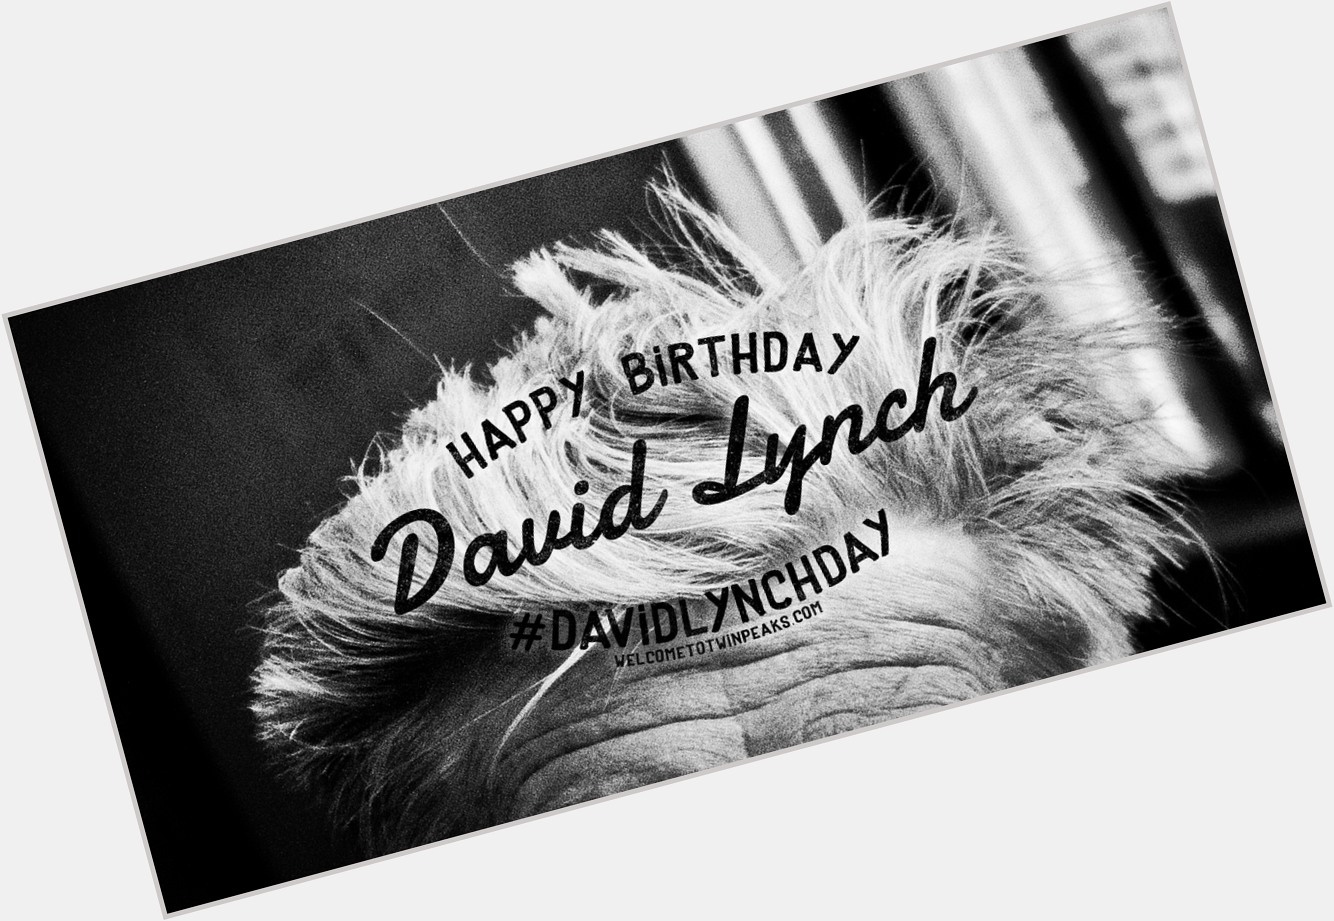 HAPPY BIRTHDAY, DAVID LYNCH!
Share your birthday message, tribute or David Lynch hairdo and tag with 